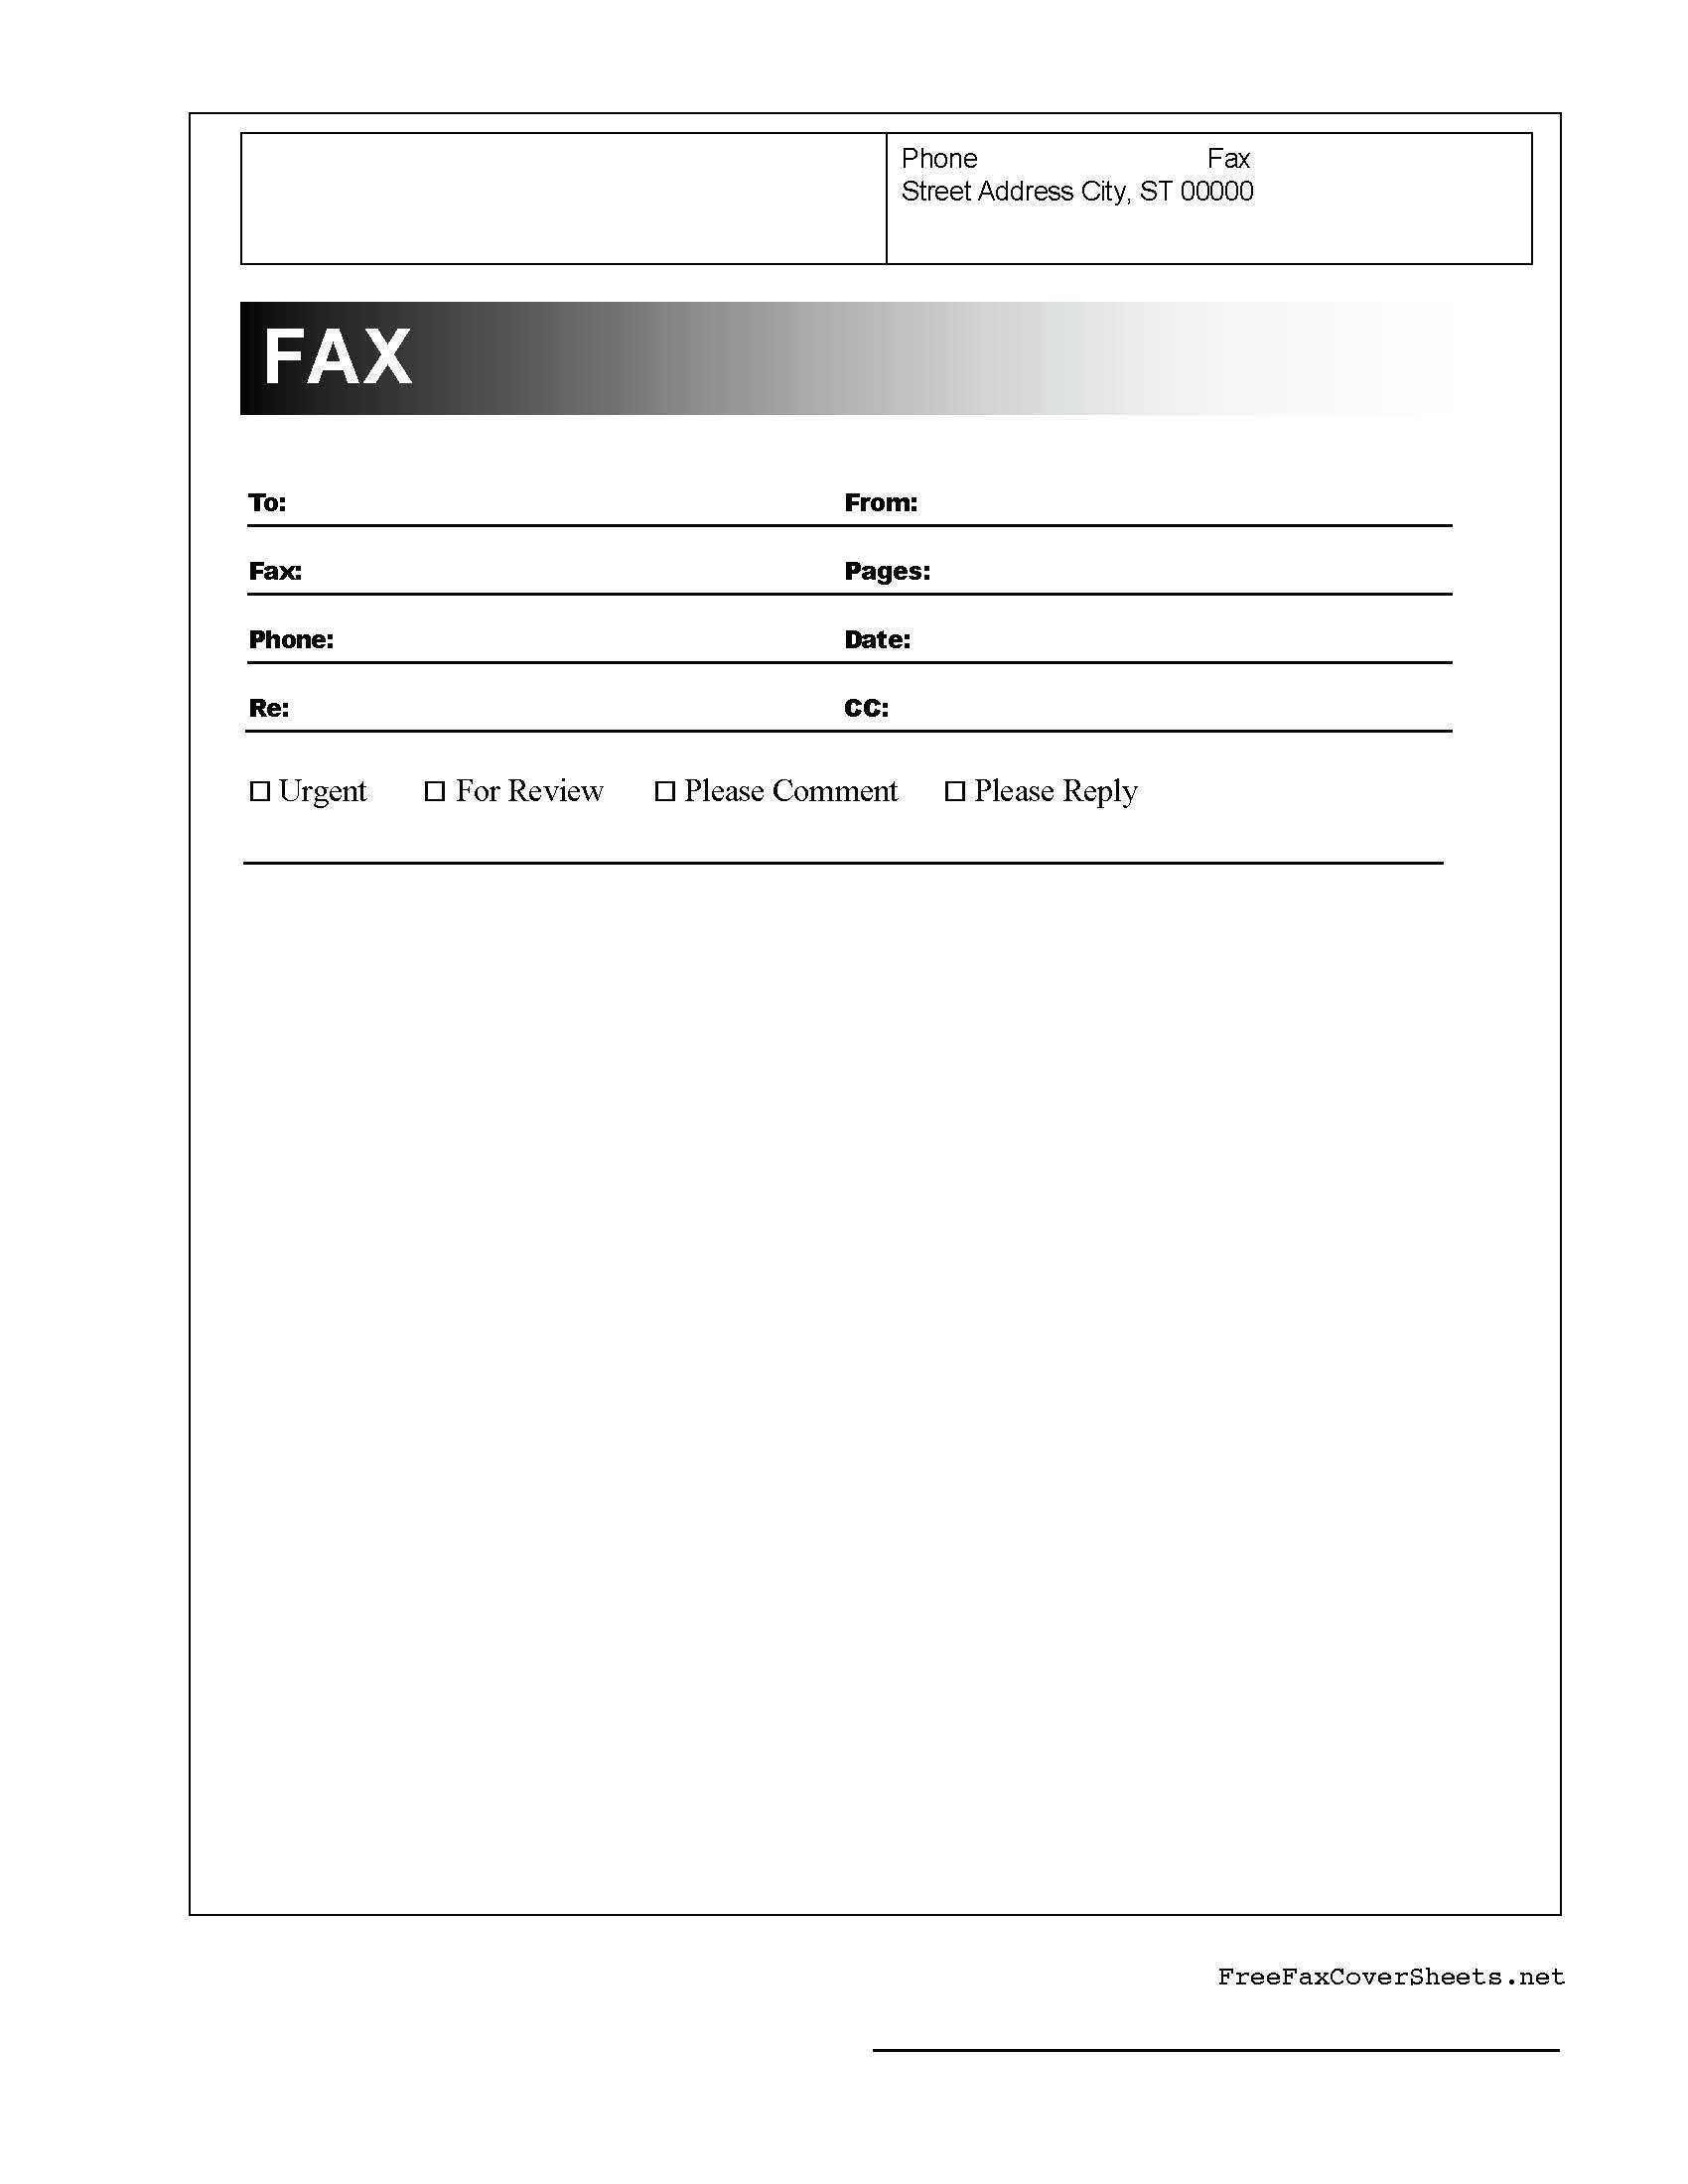 028 Basic Fax Cover Sheet Template Templates Word Amazing With Regard To Fax Cover Sheet Template Word 2010